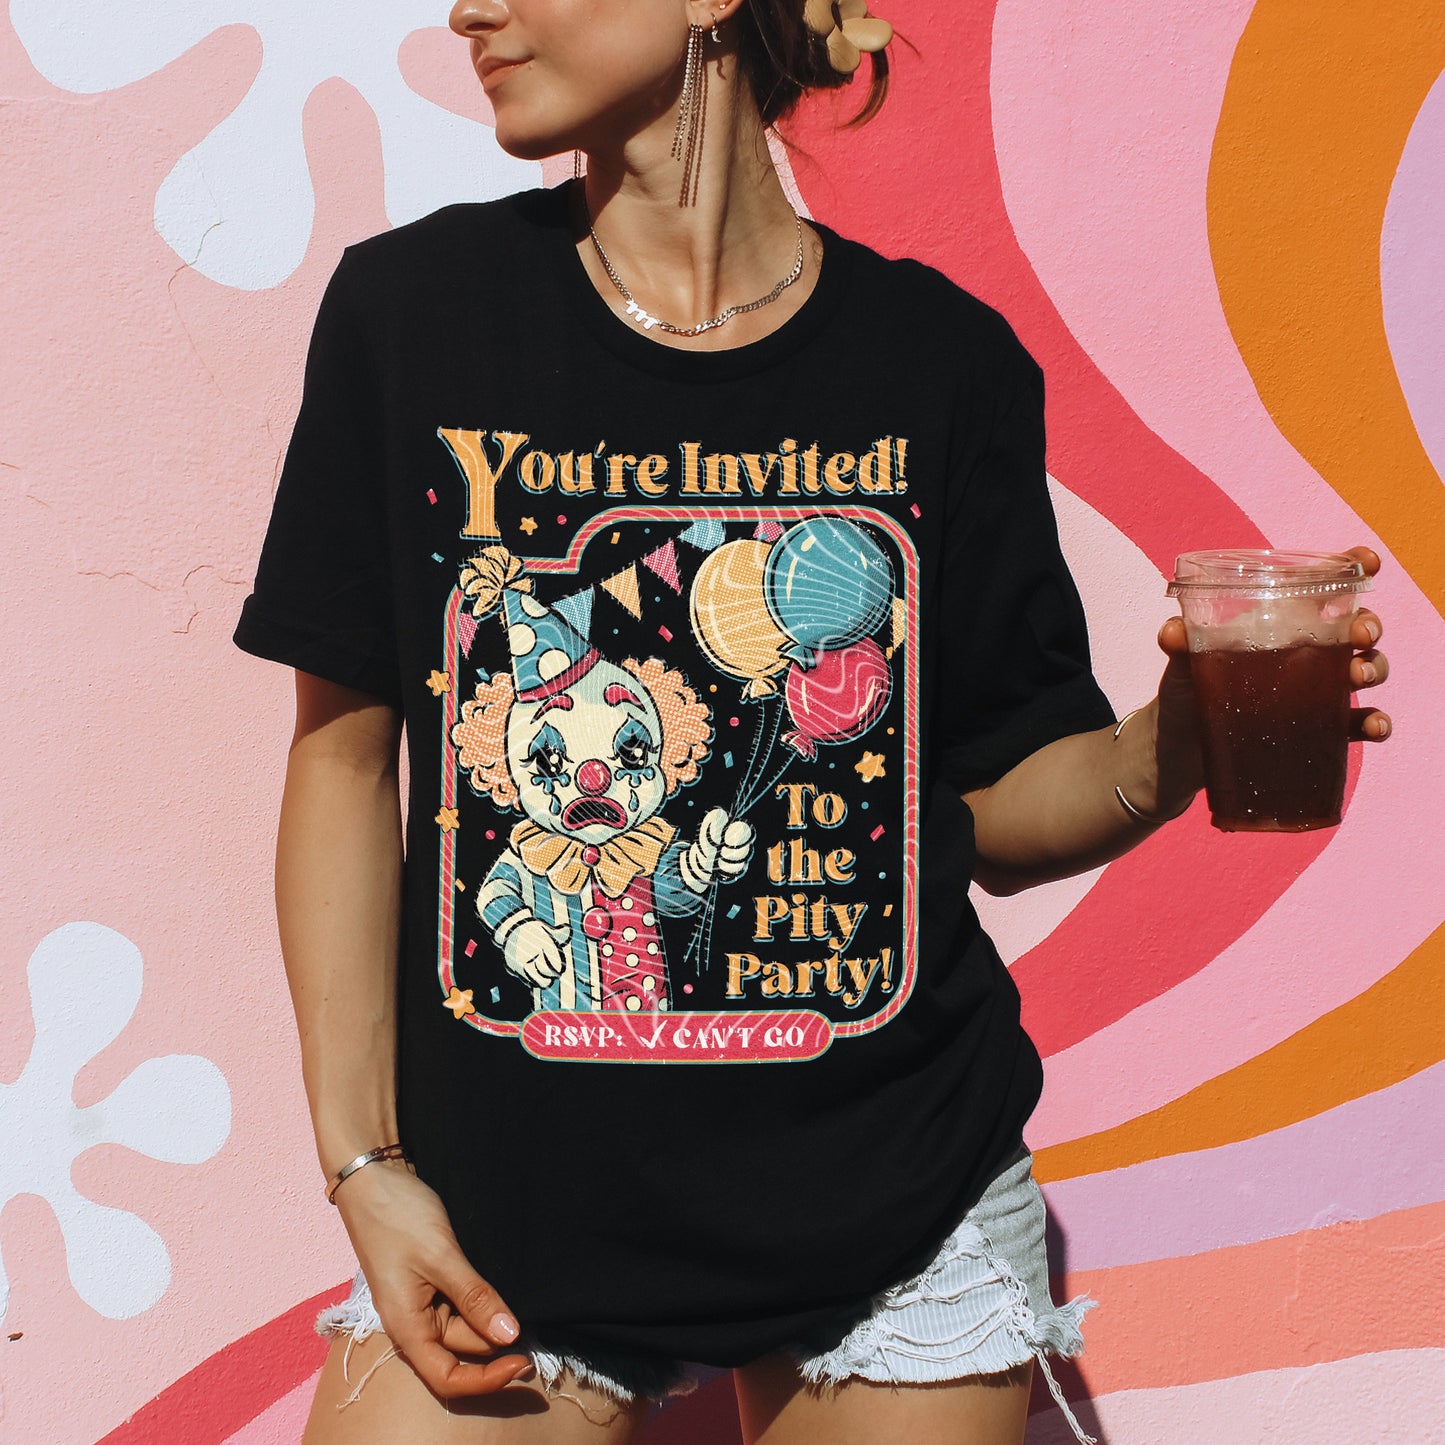 PITTY PARTY TEE